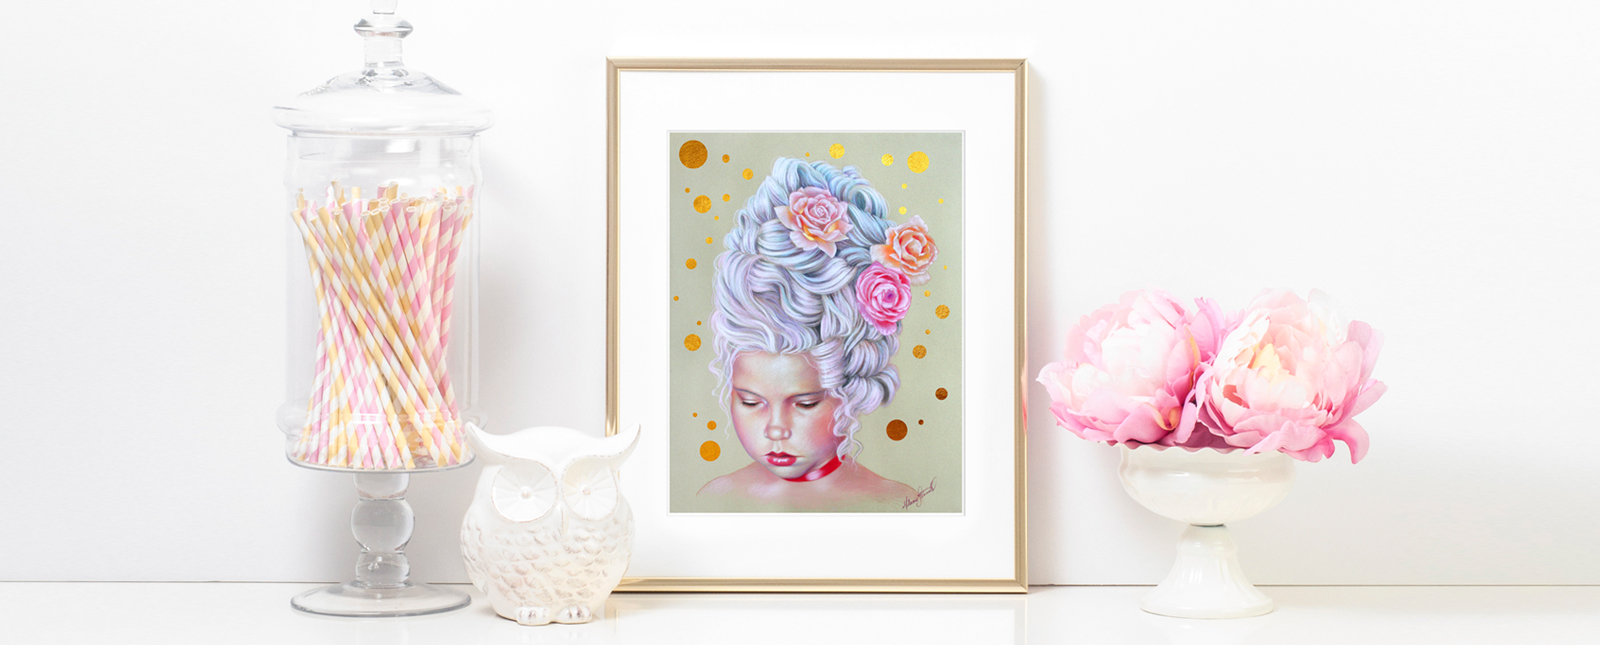 A framed artistic painting by Melanie Stimmell of a woman with flowers in her hair is displayed between a glass container of straws and a vase with pink peonies on a white shelf.